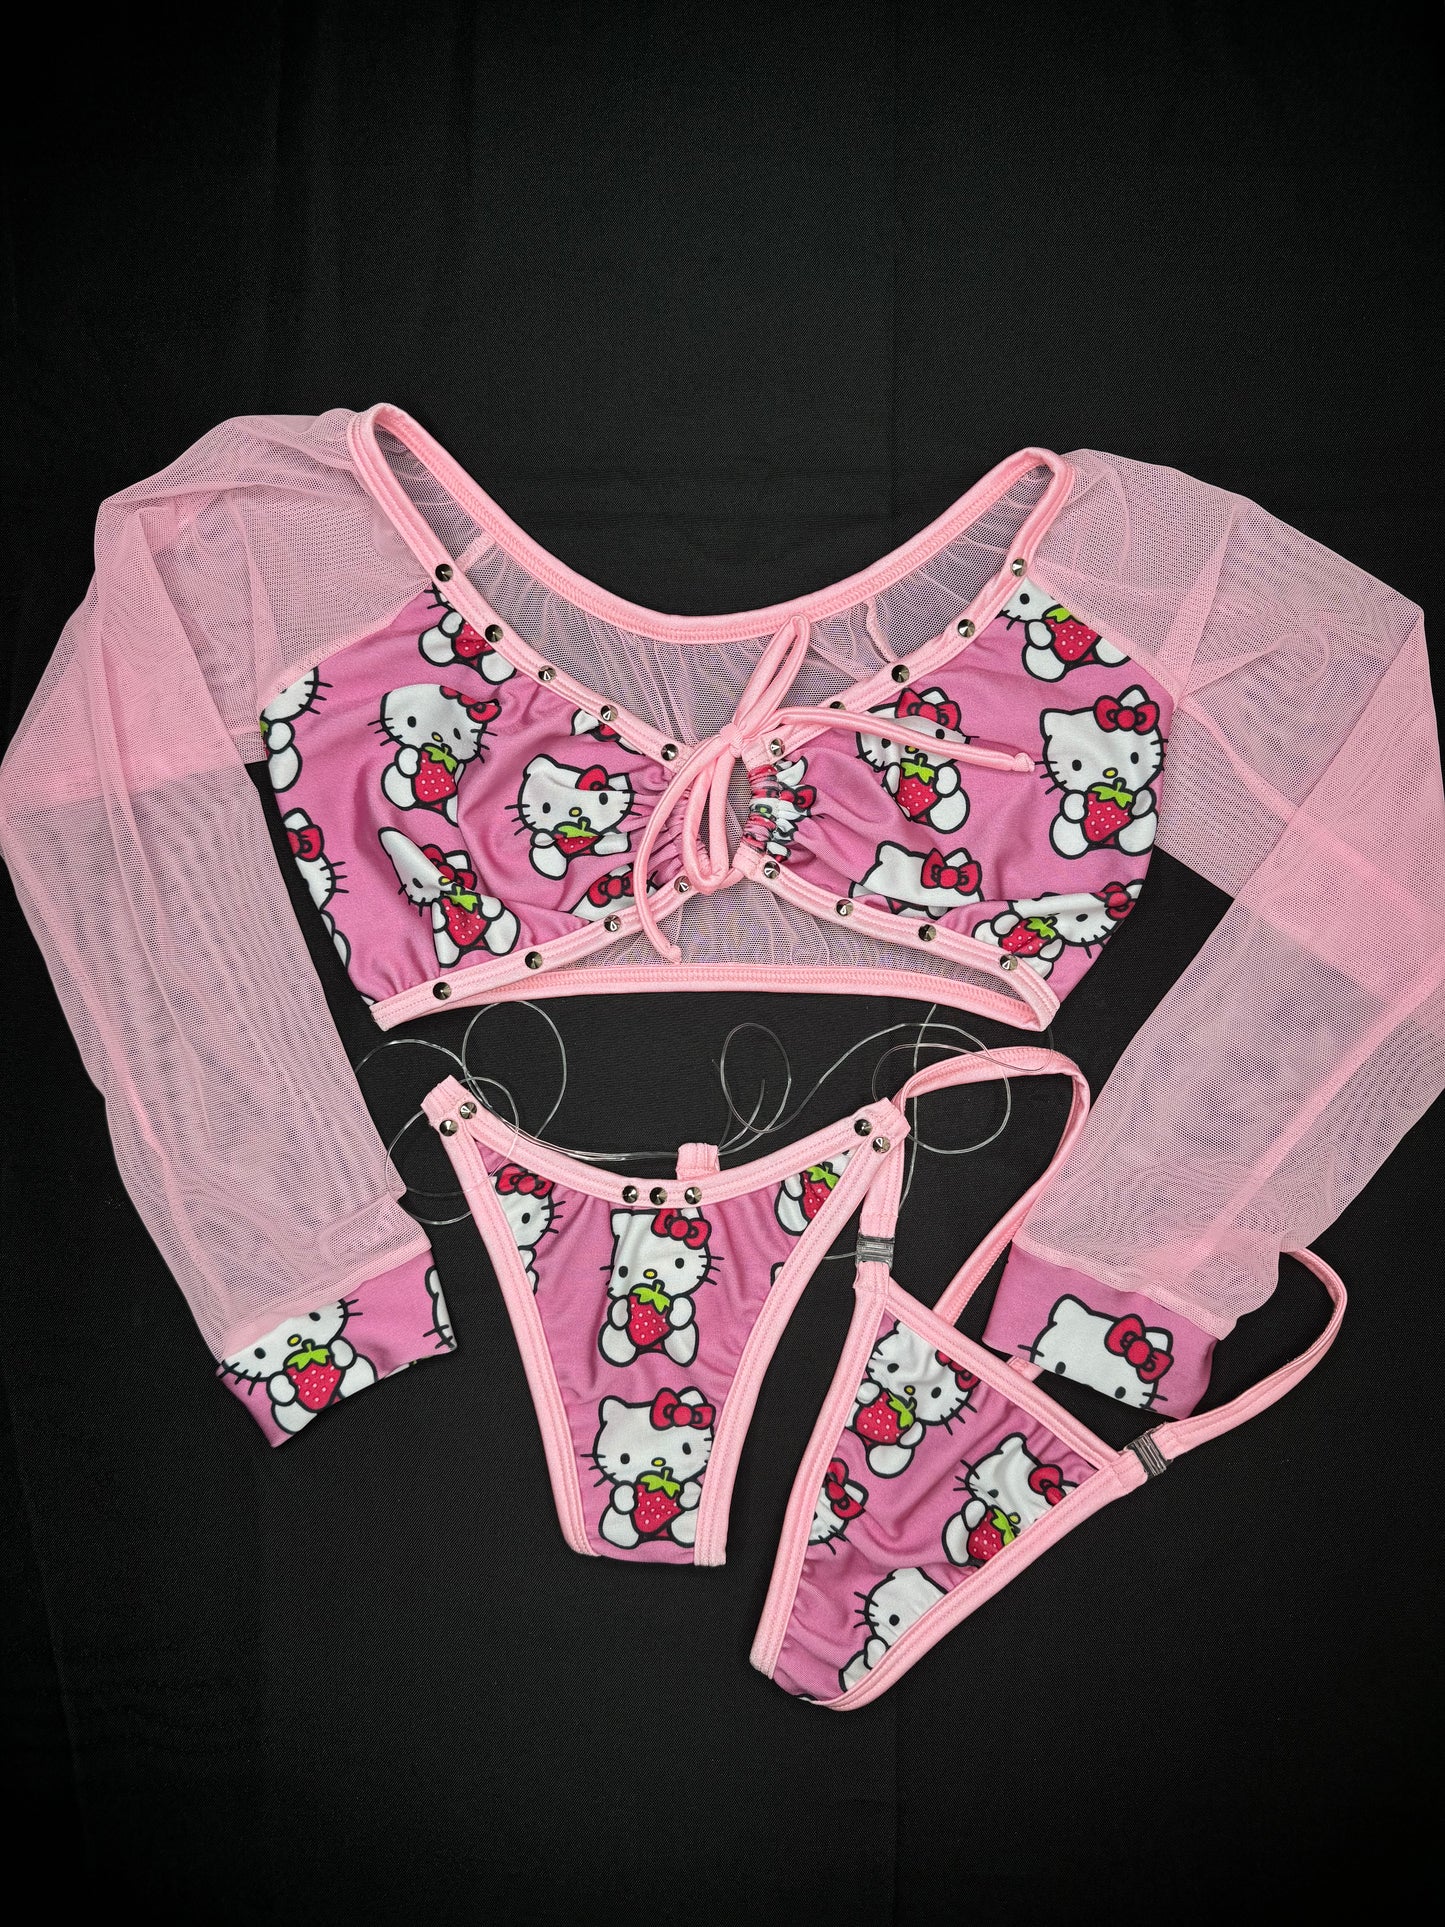 Baby Pink Mesh Strawberry Kitty Spandex Two-Piece Lingerie Outfit